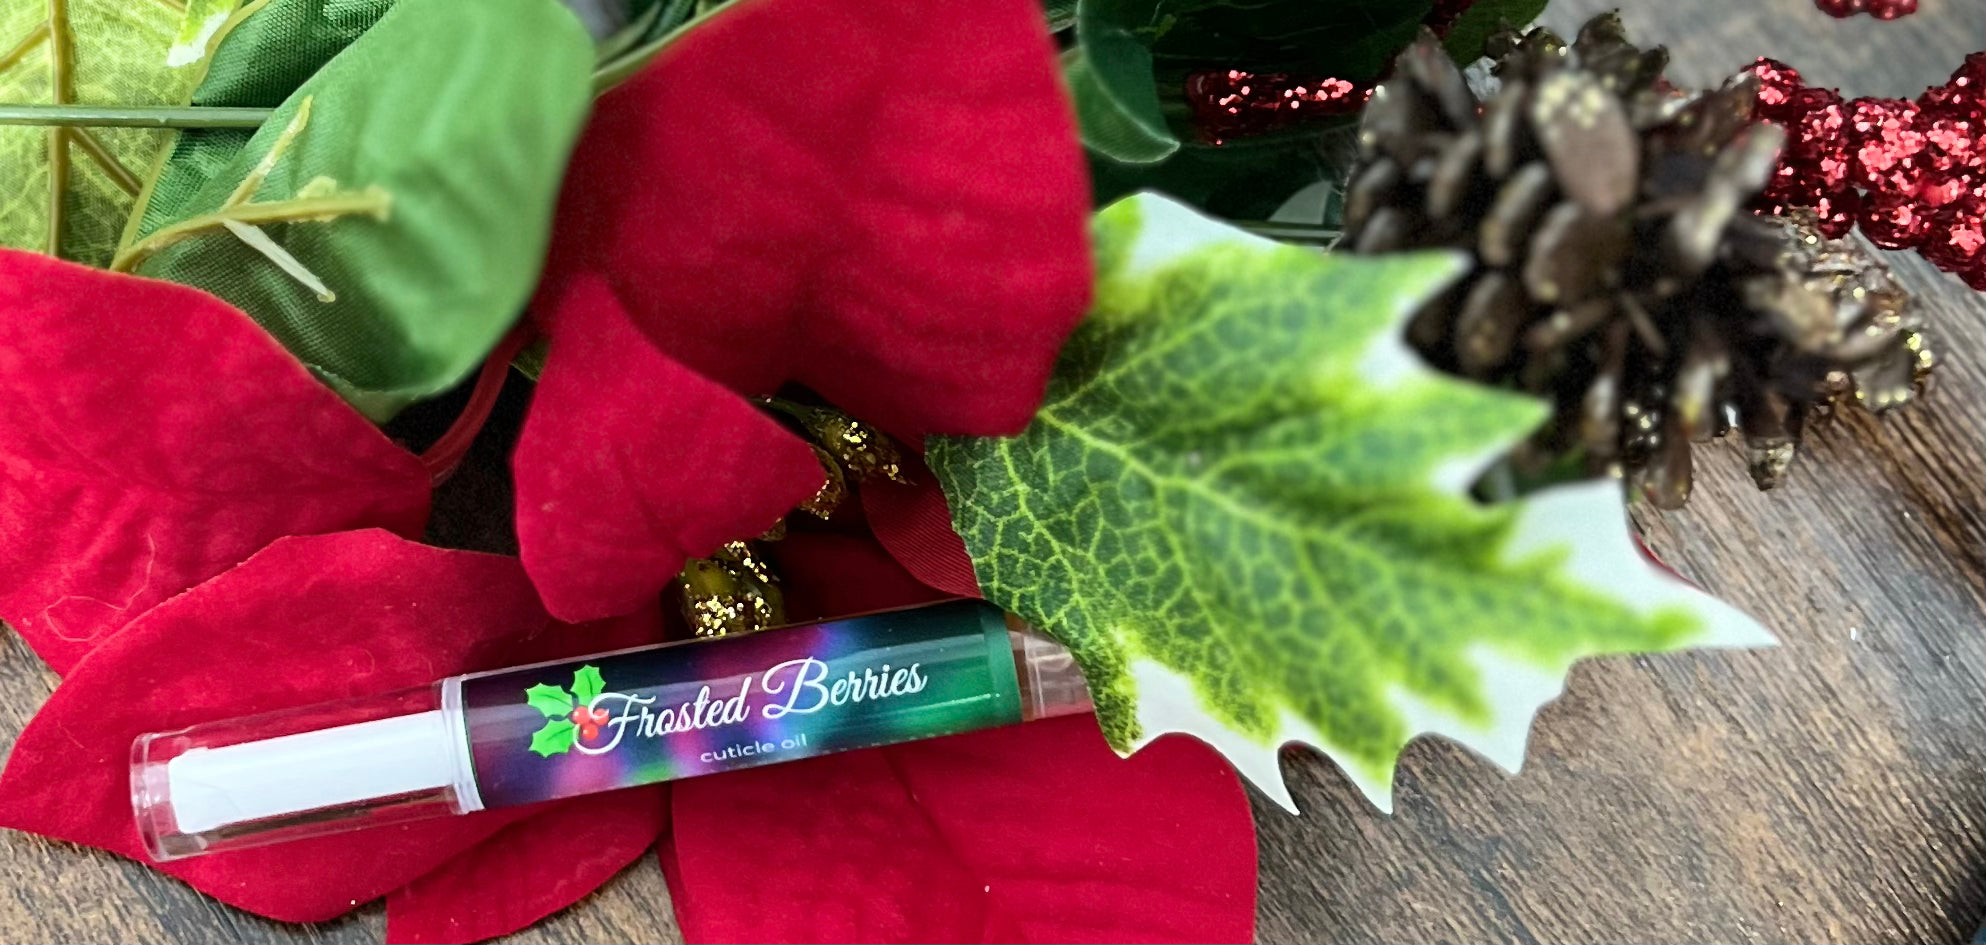 Frosted Berries Cuticle Oil